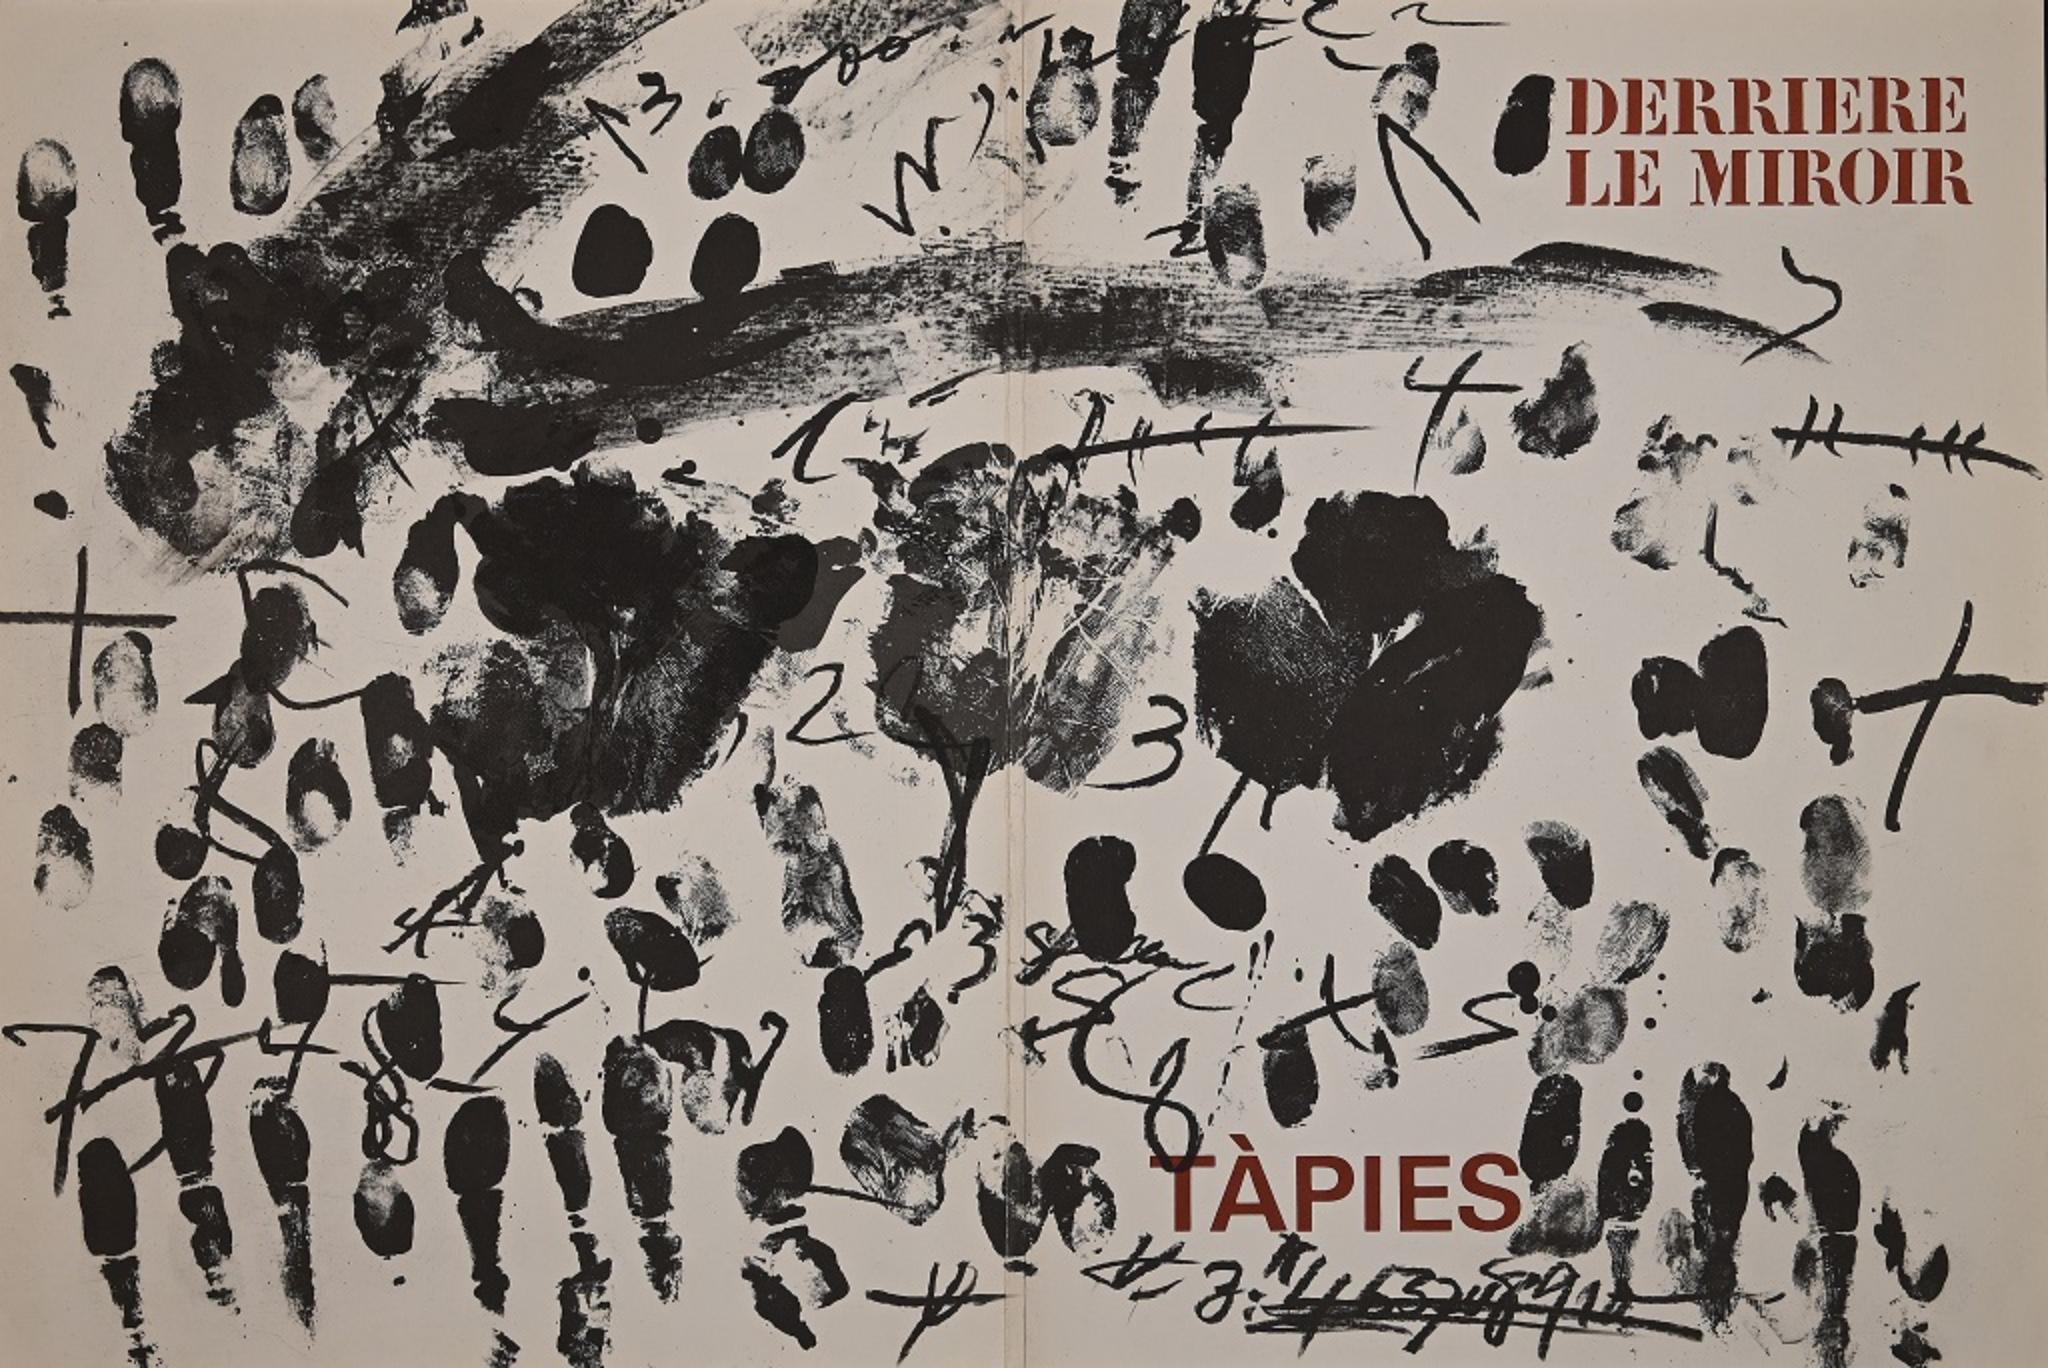 Antoni Tàpies Abstract Print - Cover for Derriere Le Miroir - Original Lithograph by Antoni Tapies - 1968